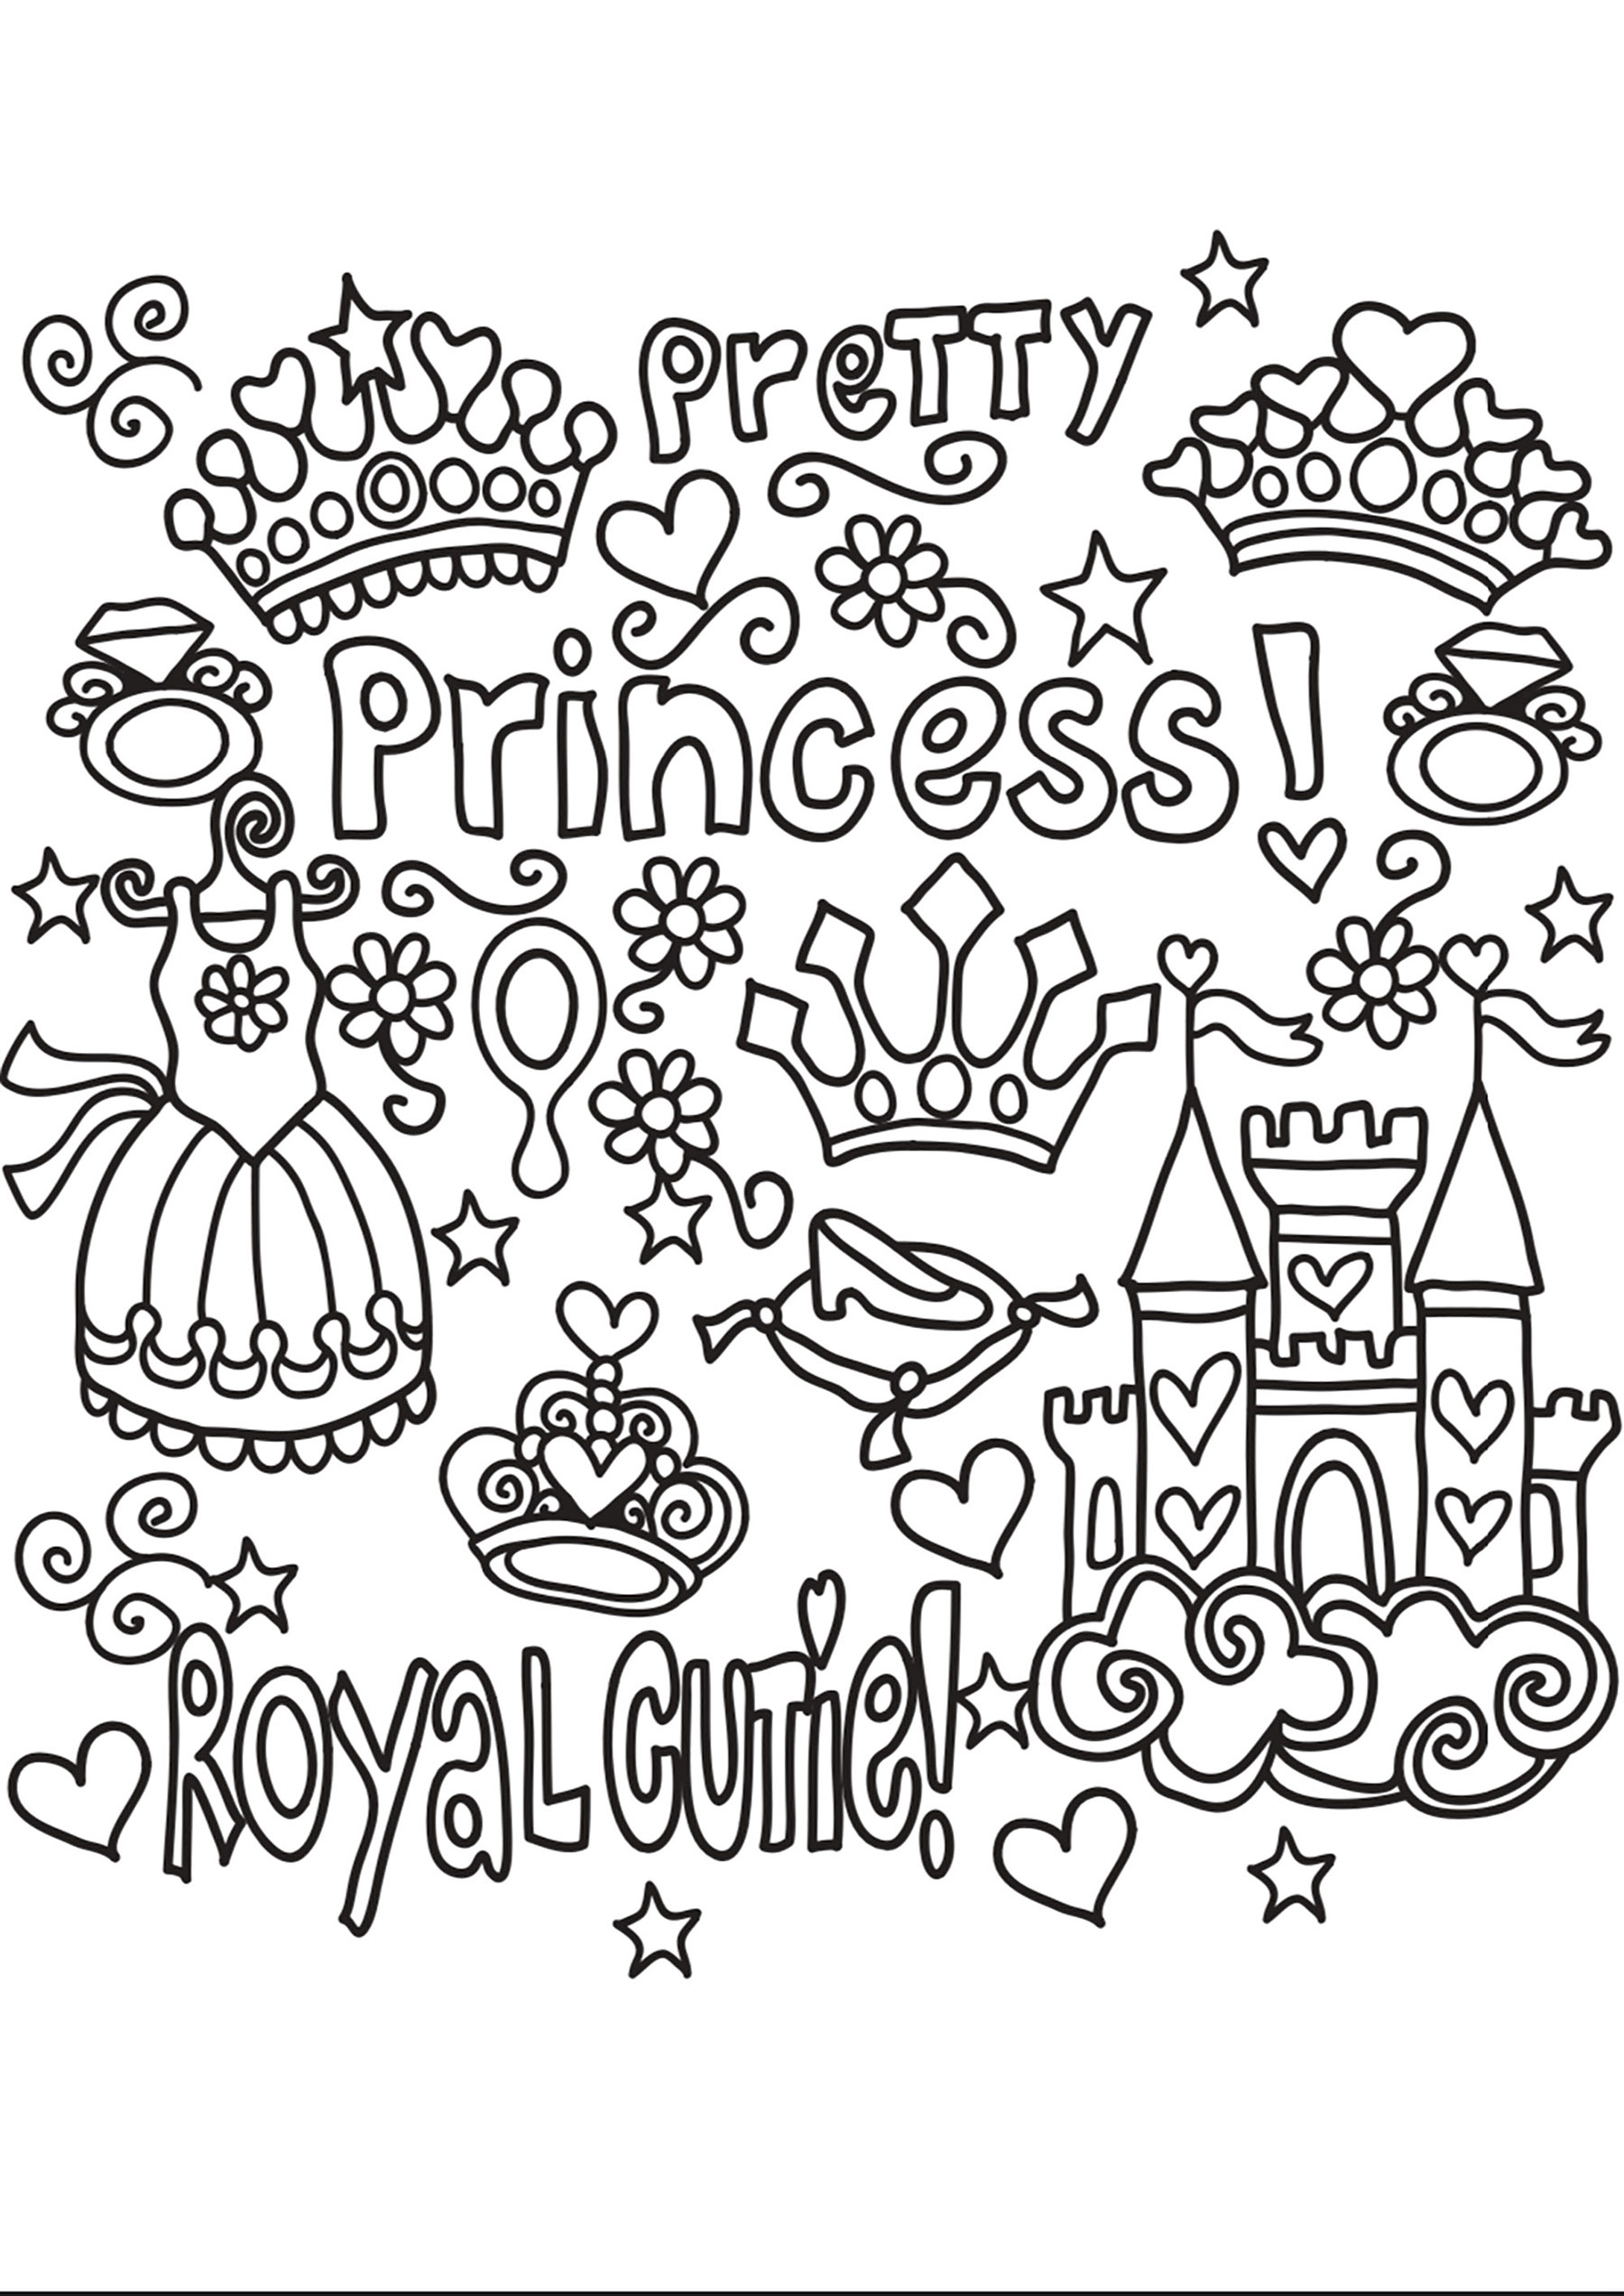 Doodle Princesse. Numerous objects and texts relating to princesses: castle, dress, crown ...